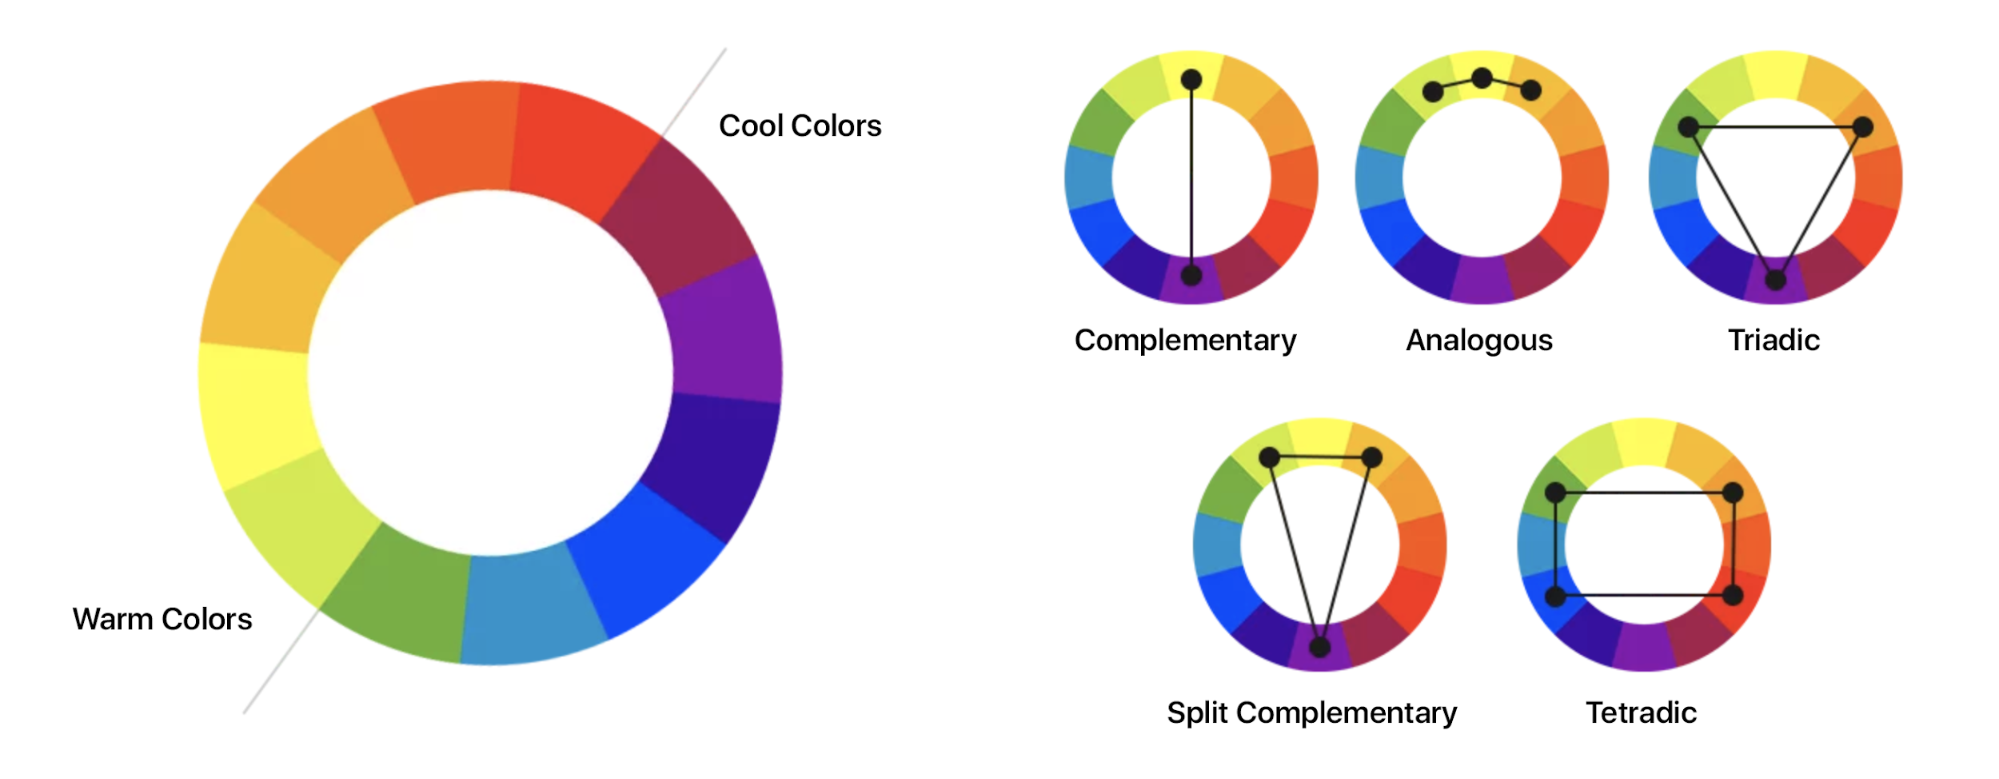 Strategies for combining colors properly